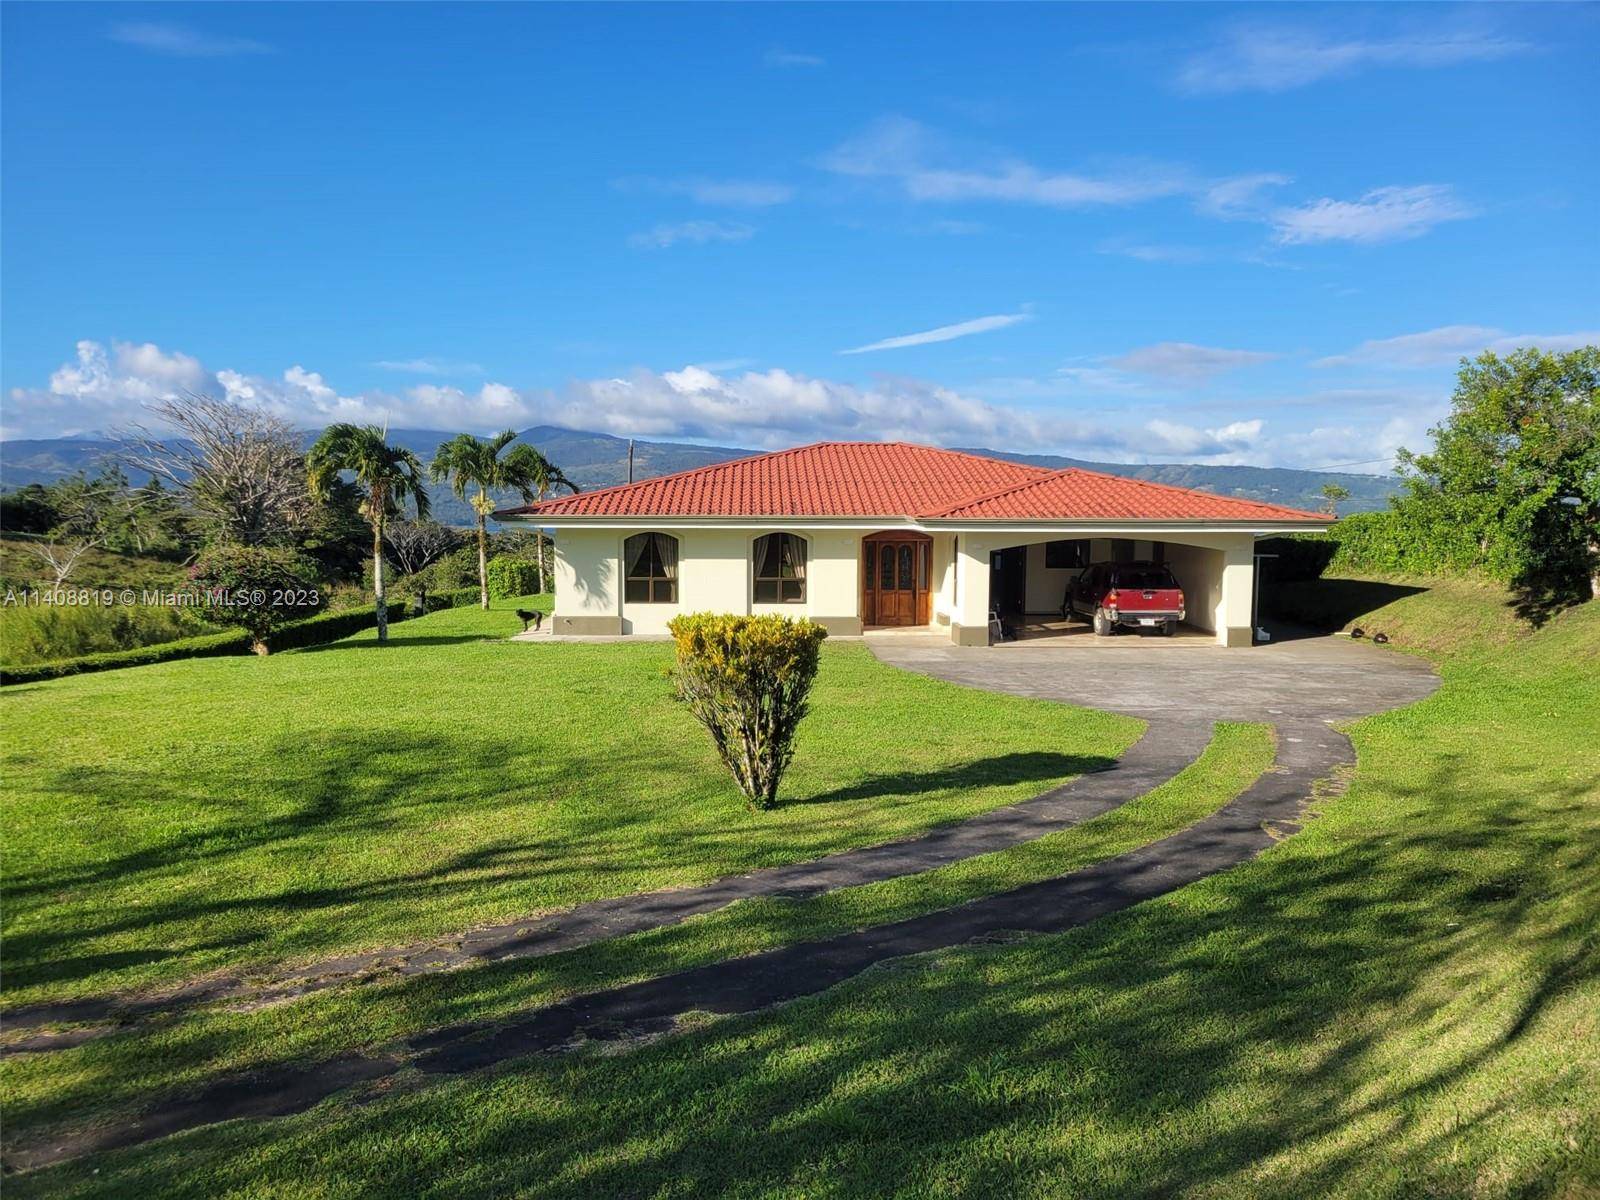 Beautiful 4 bedroom house located in Tilaran, a charming town situated in the province of Guanacaste, Costa Rica.